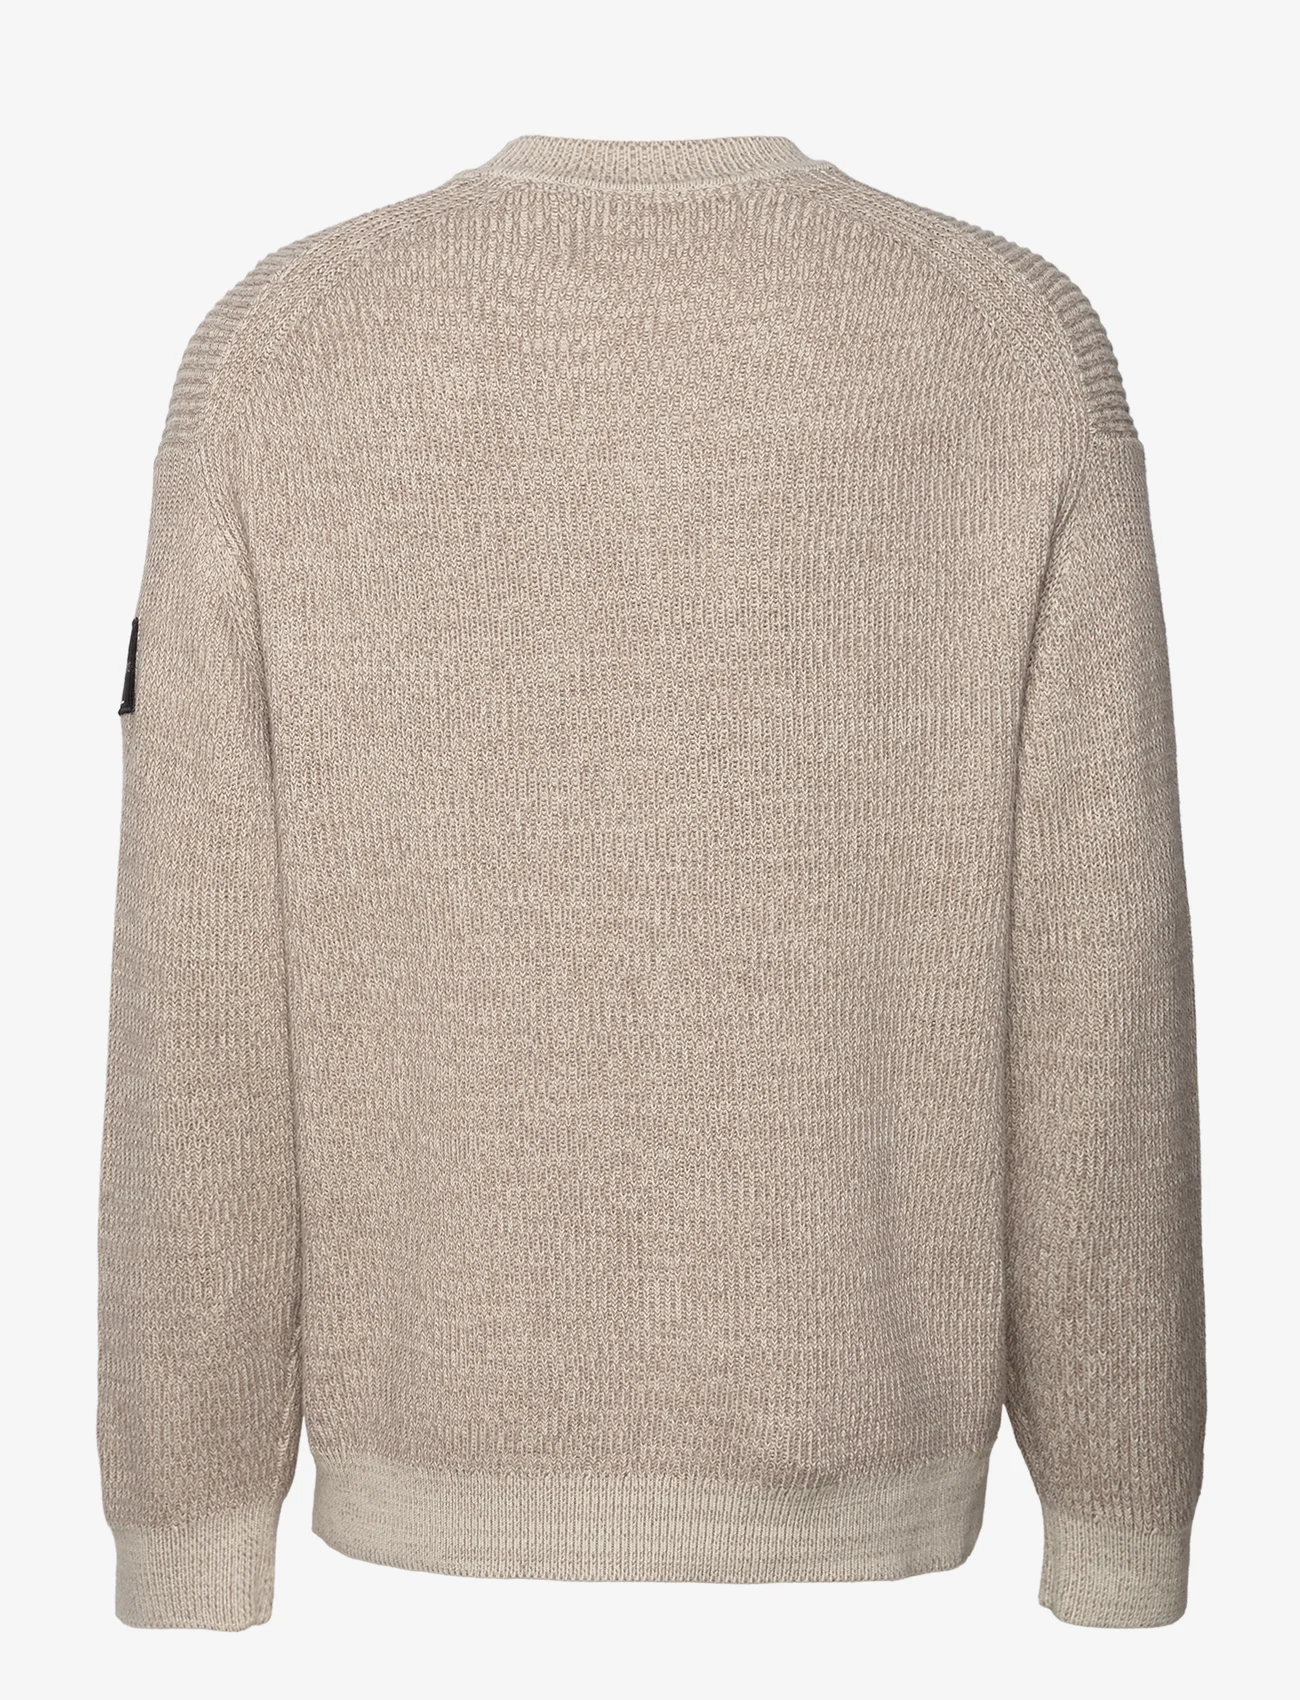 Calvin Klein Jeans - BADGE PLATED CREW NECK SWEATER - eggshell / perfect taupe - 1